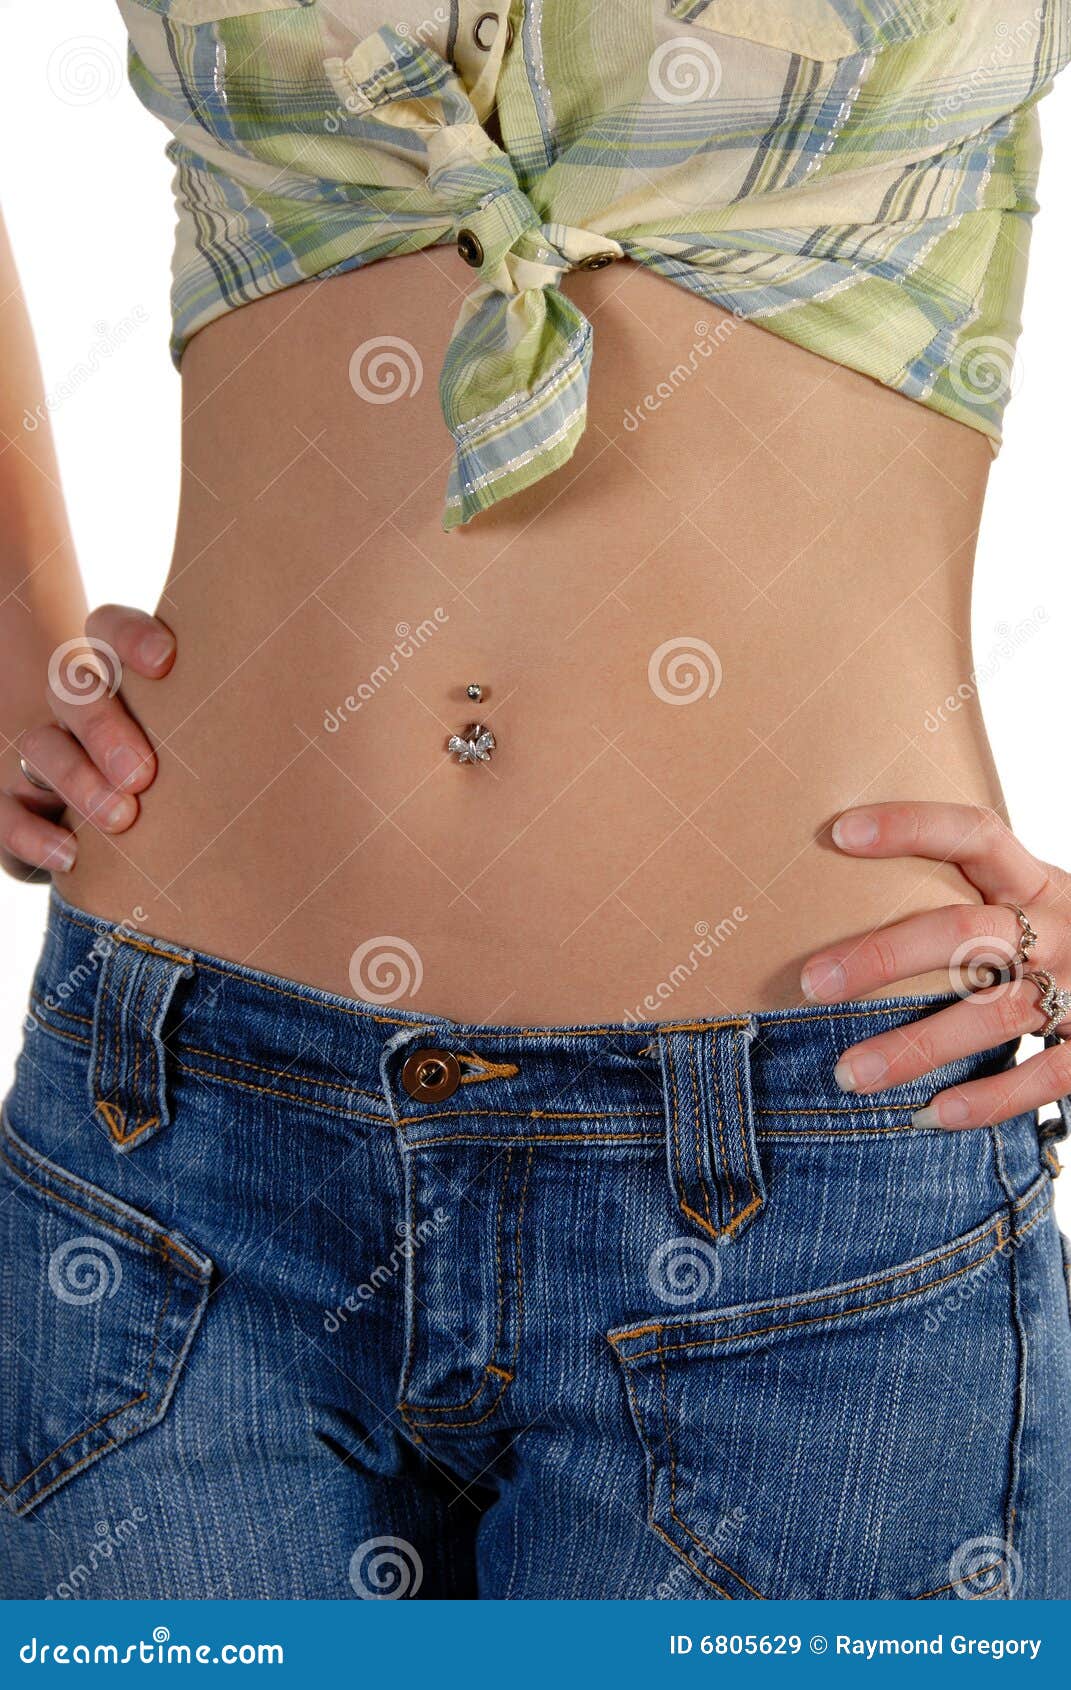 Slim Active Stomach Of Model Royalty Free Stock Images - Image: 6805629